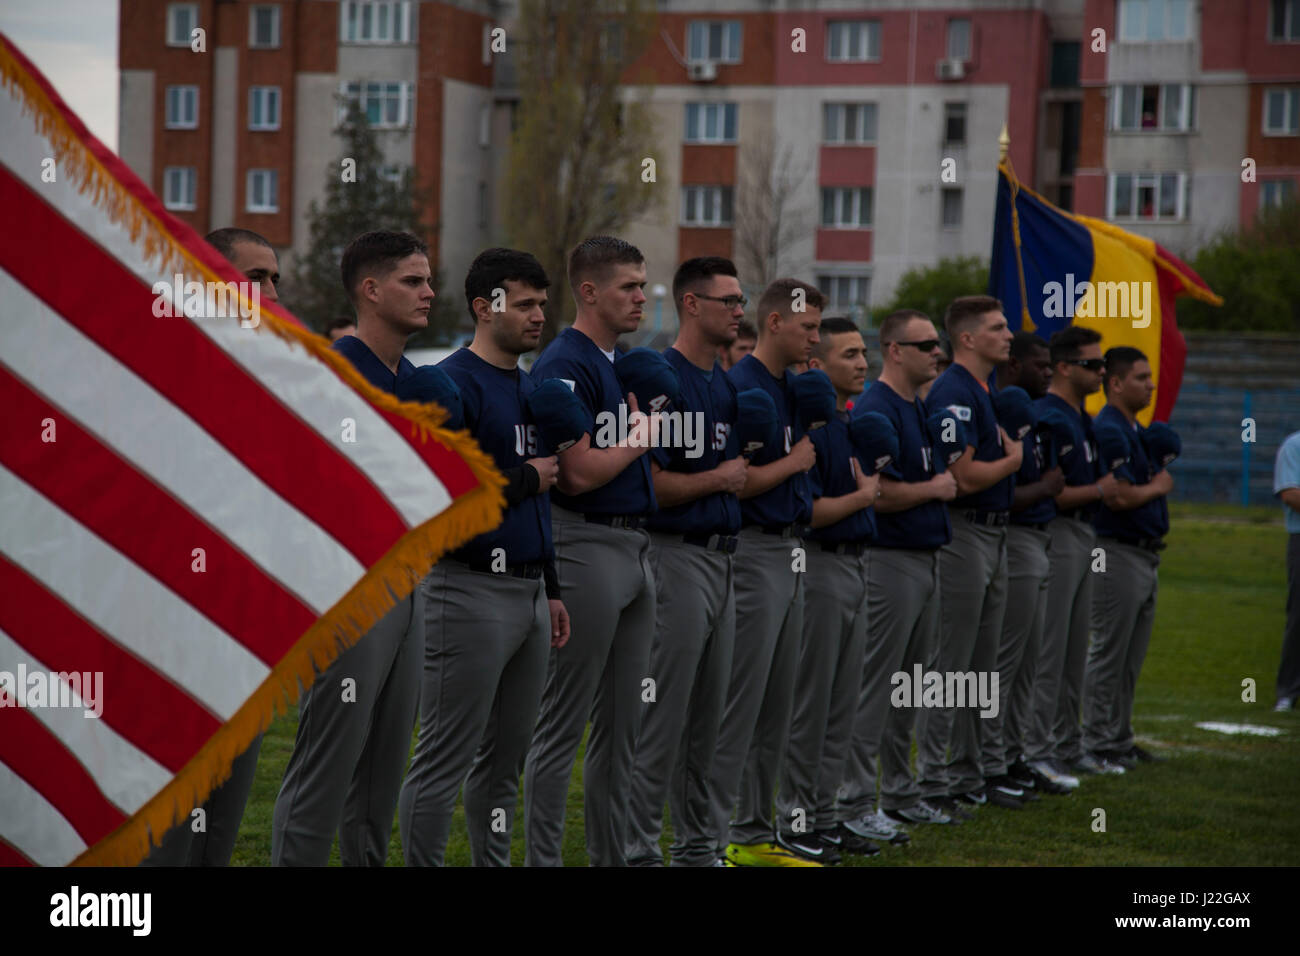 U.S. Marines with the Black Sea Rotational Force 17.1 stand for the National Anthem at the Jackie Robinson Day baseball game between the U.S. Marines and a Romanian team in Constanta, Romania April 15, 2017. The Marine and Romanian players all wore the number 42 jersey in honor of the 70th anniversary of Robinson becoming the first African American player in the Major League Baseball history. (U.S. Marine Corps photo by Cpl. Emily Dorumsgaard) Stock Photo